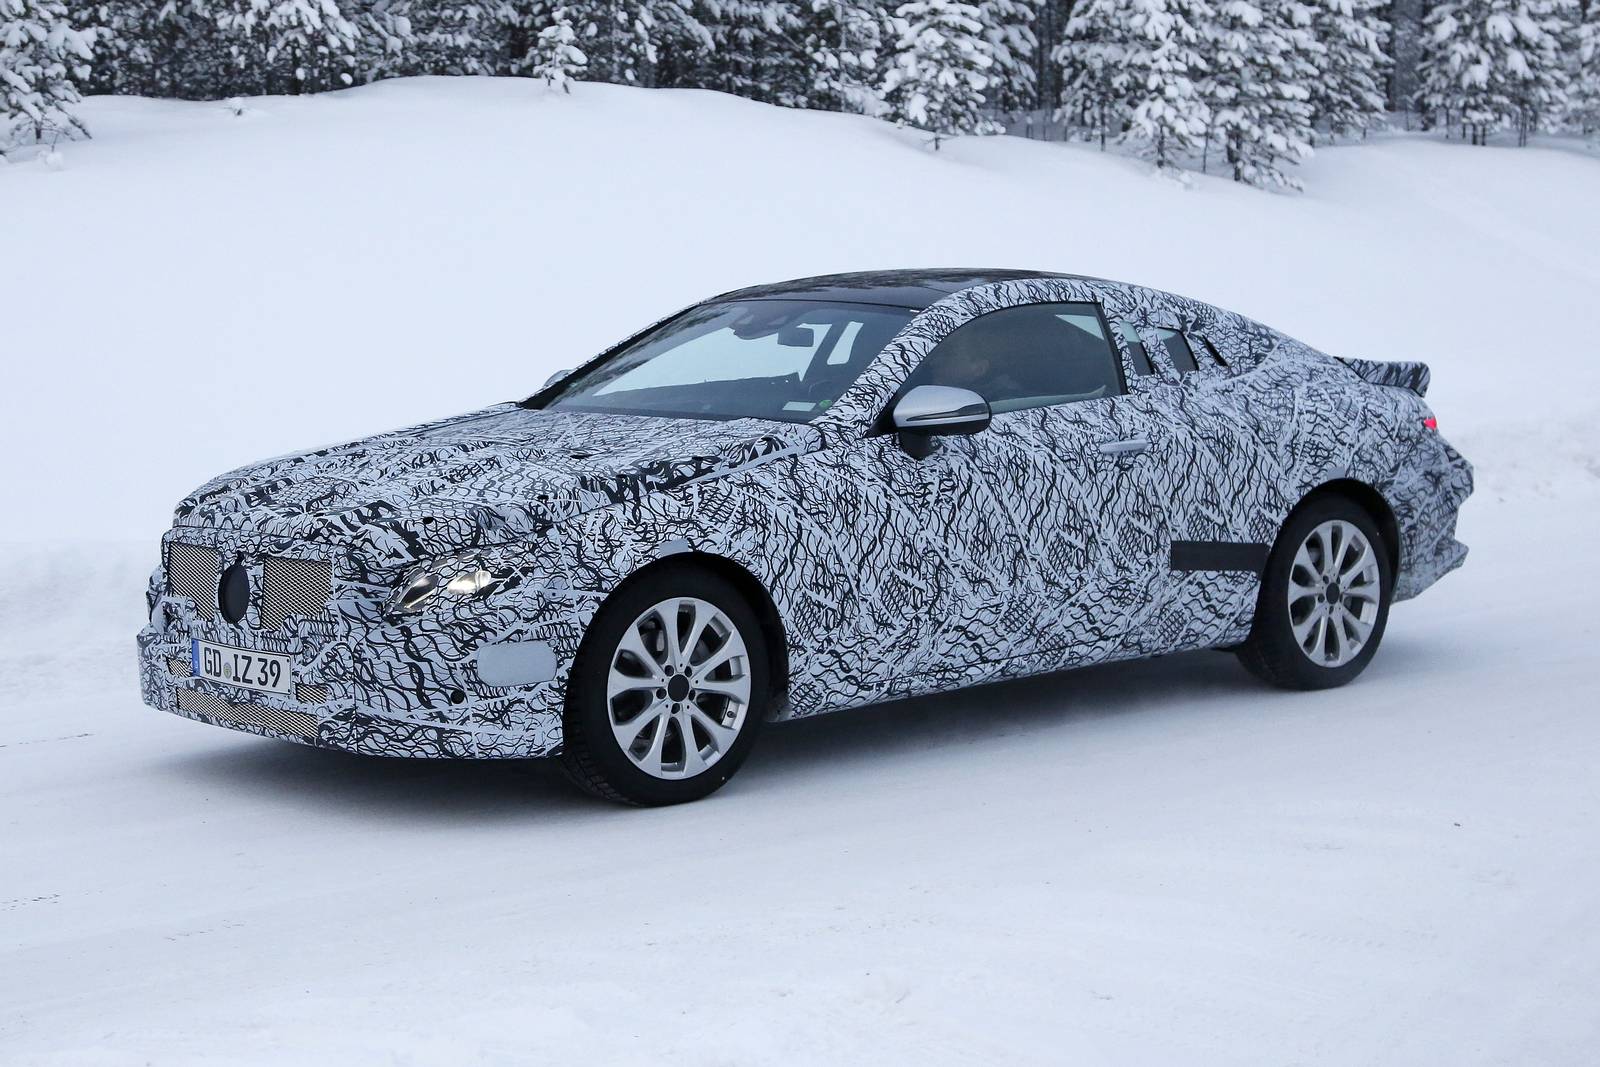 Spy Images From The E-Class Coupe And E-Class Estate By Mercedes-Benz 7